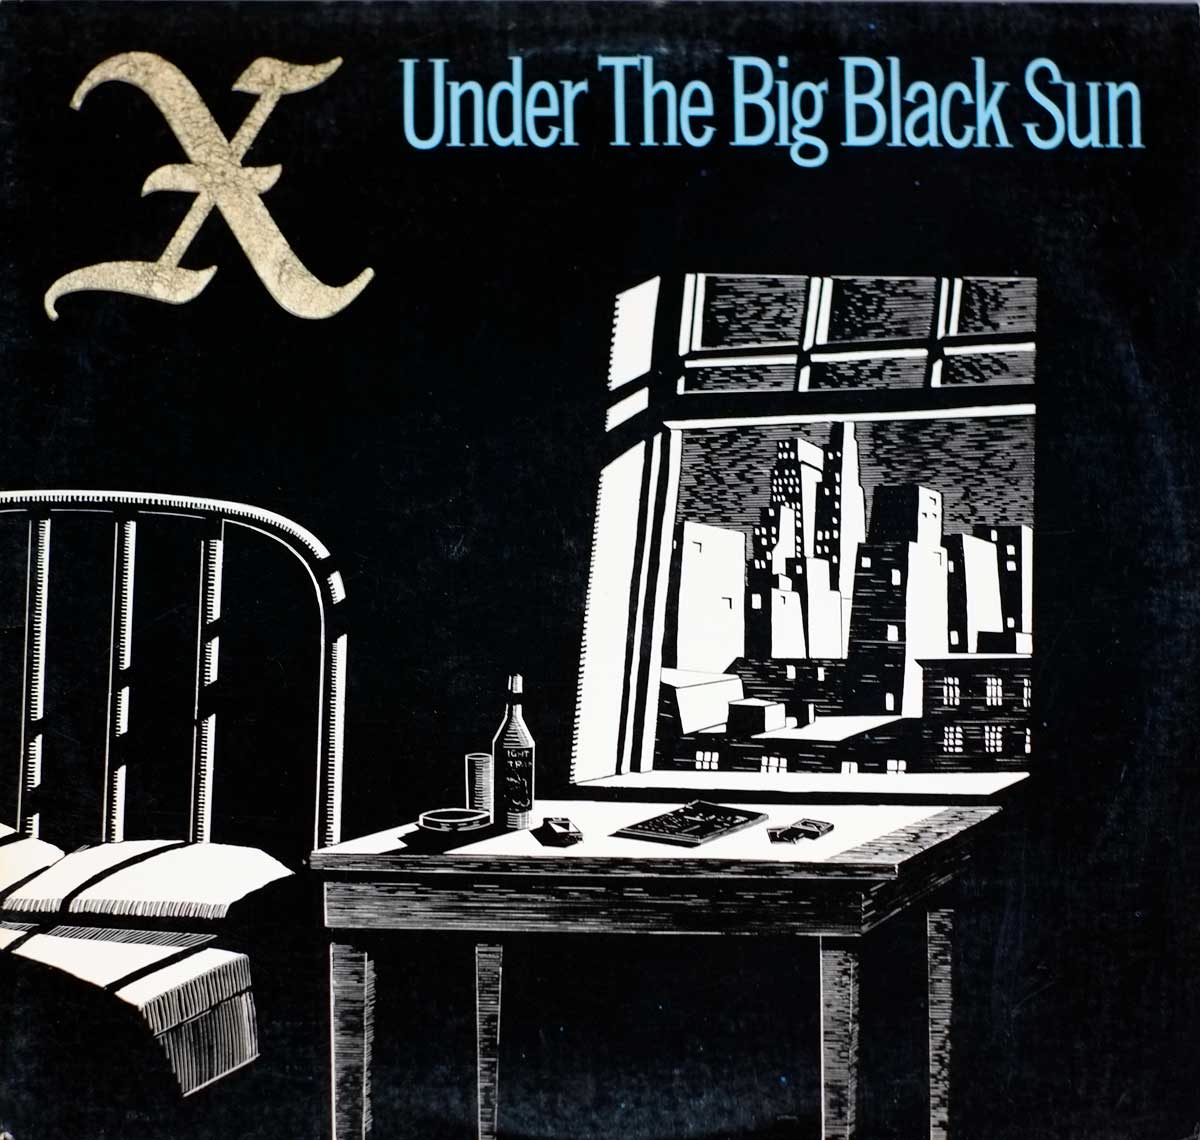 High Quality Photo of Album Front Cover  "X - Under The Big Black Sun"